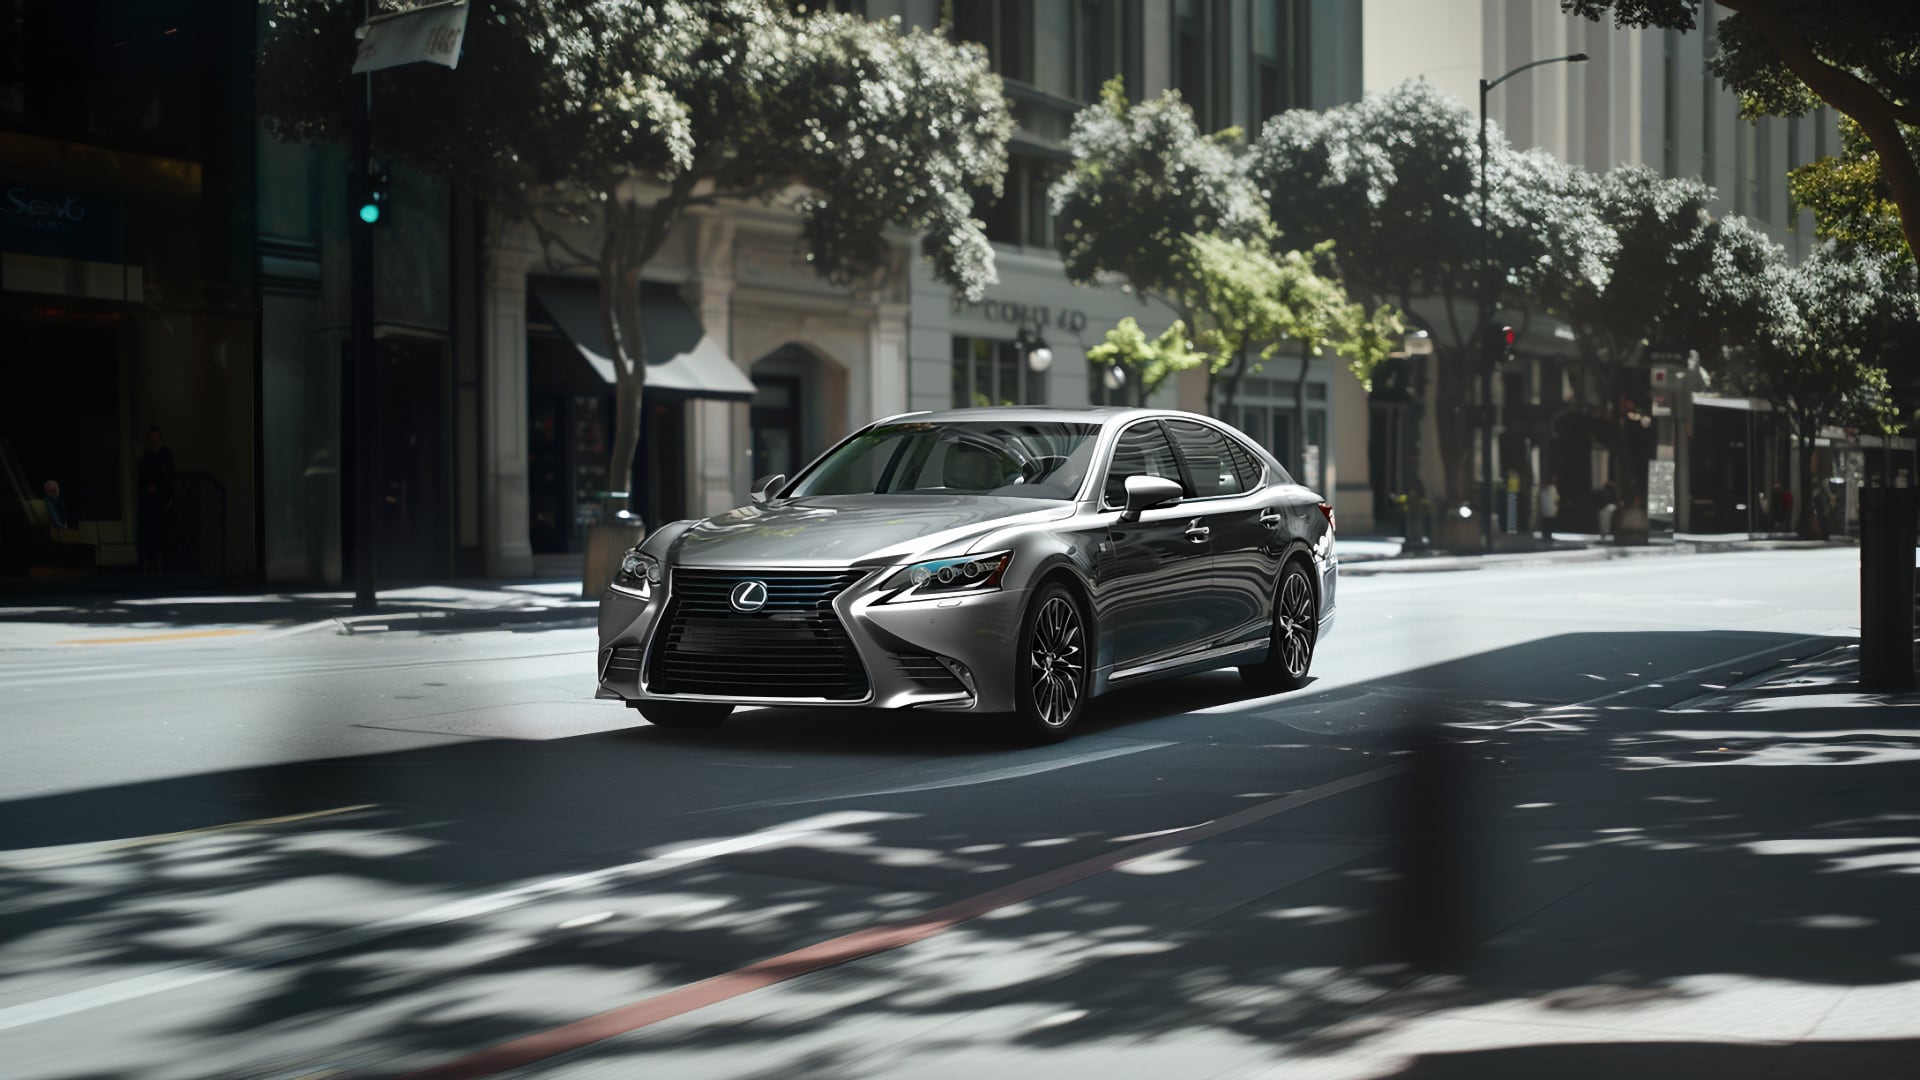 The 2019 Lexus LS 460 is driving down a city street.